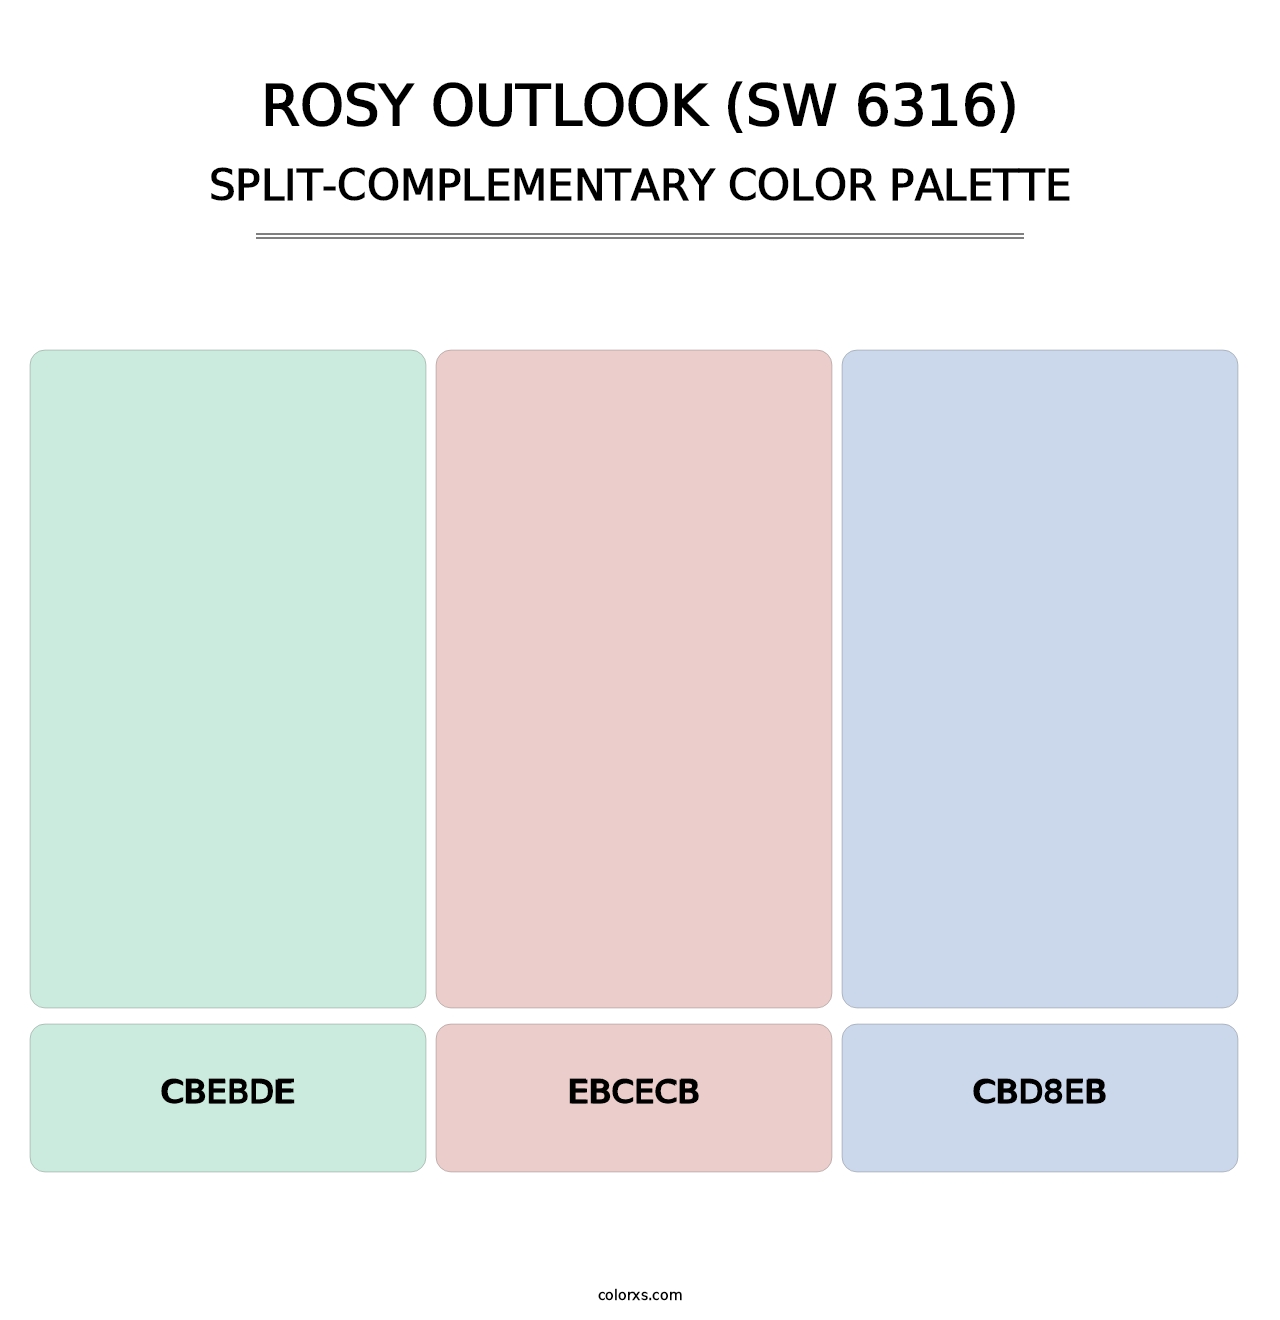 Rosy Outlook (SW 6316) - Split-Complementary Color Palette